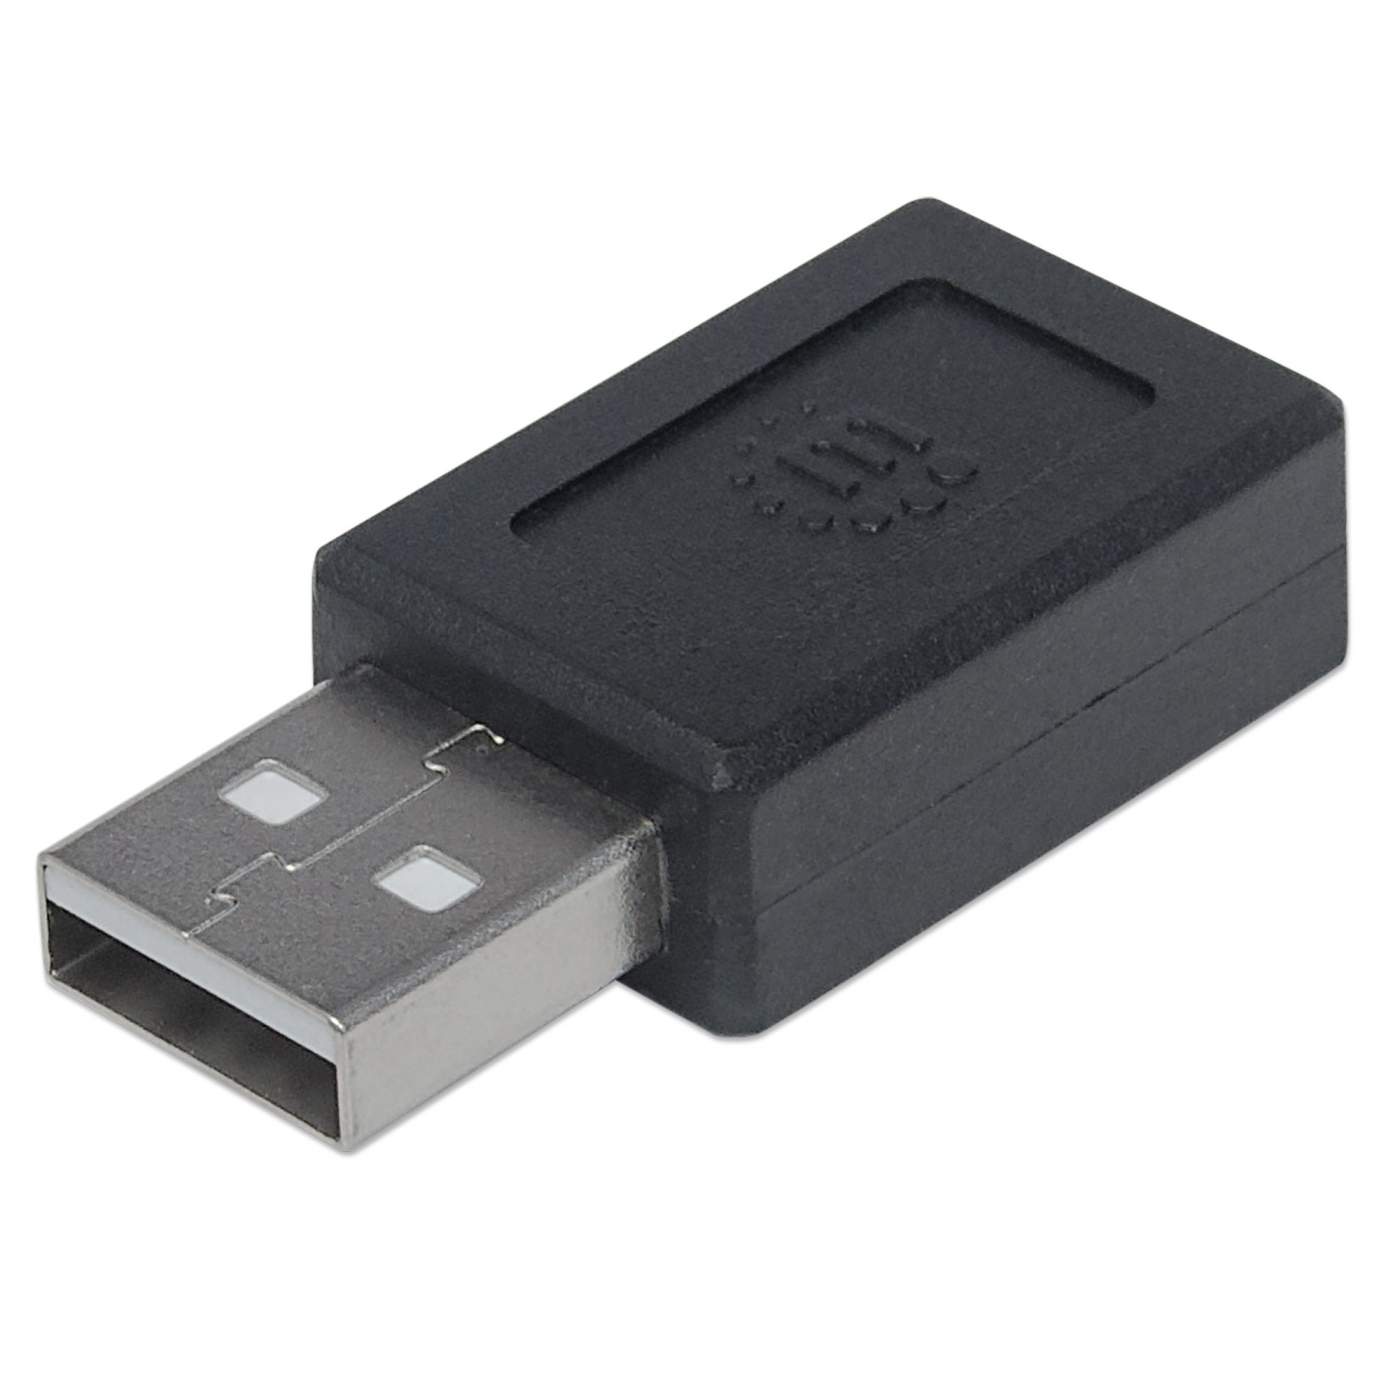 USB 2.0 Type-C to Type-A Adapter Image 1